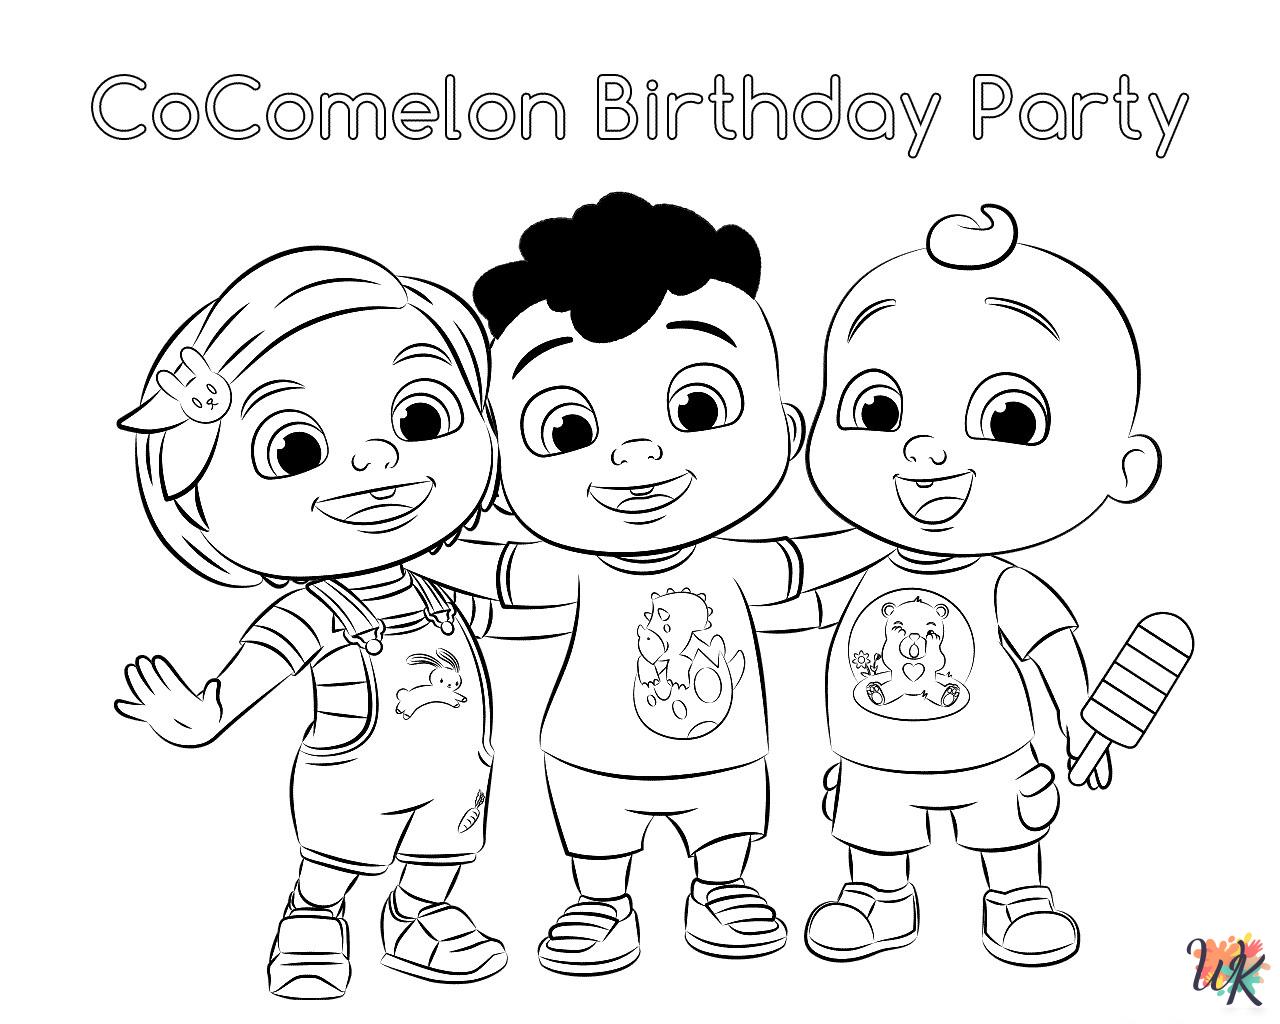 Cocomelon coloring book pages